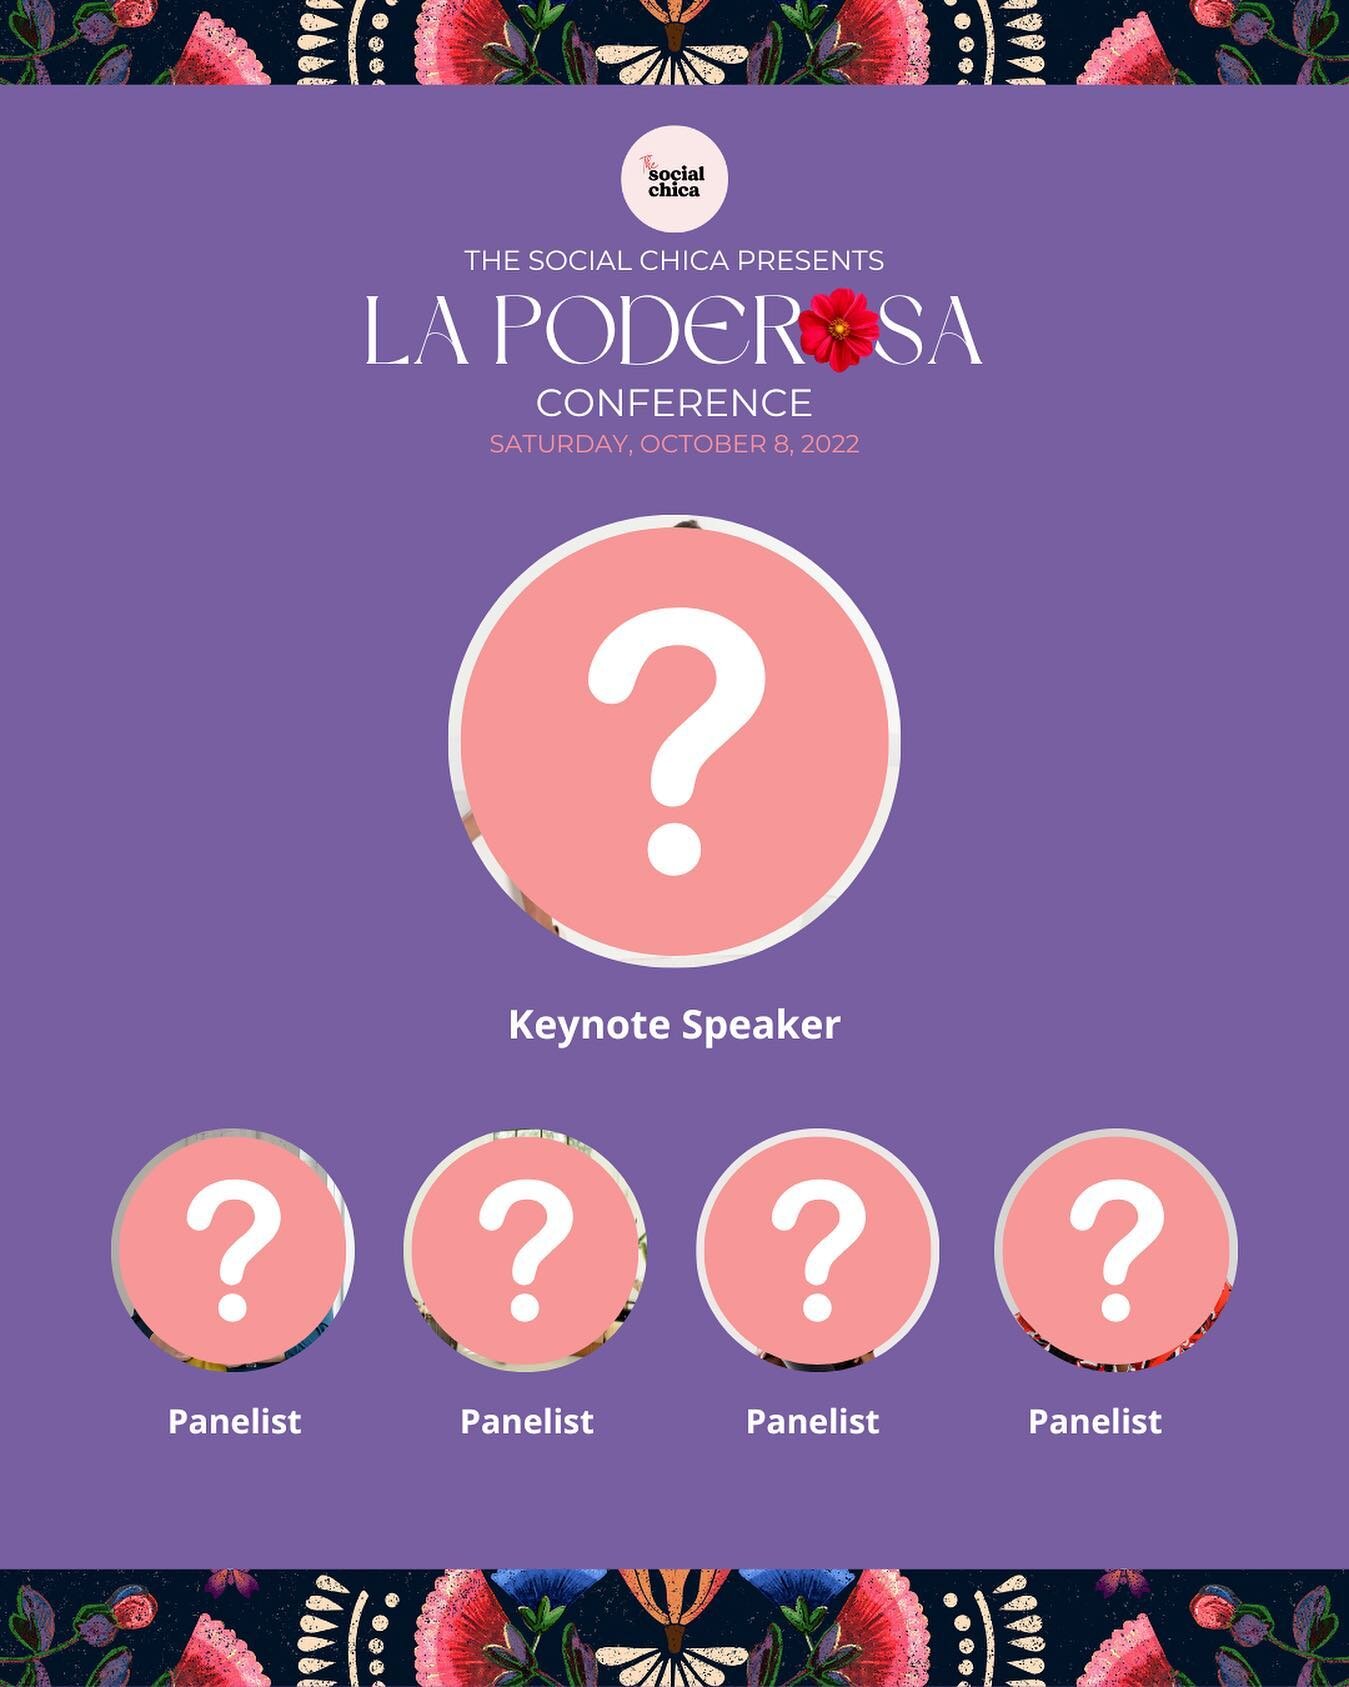 Who&rsquo;s ready for us to announce the keynote speaker &amp; panelists for #LaPoderosa Conference? 🤩 Full details dropping next week! ✨